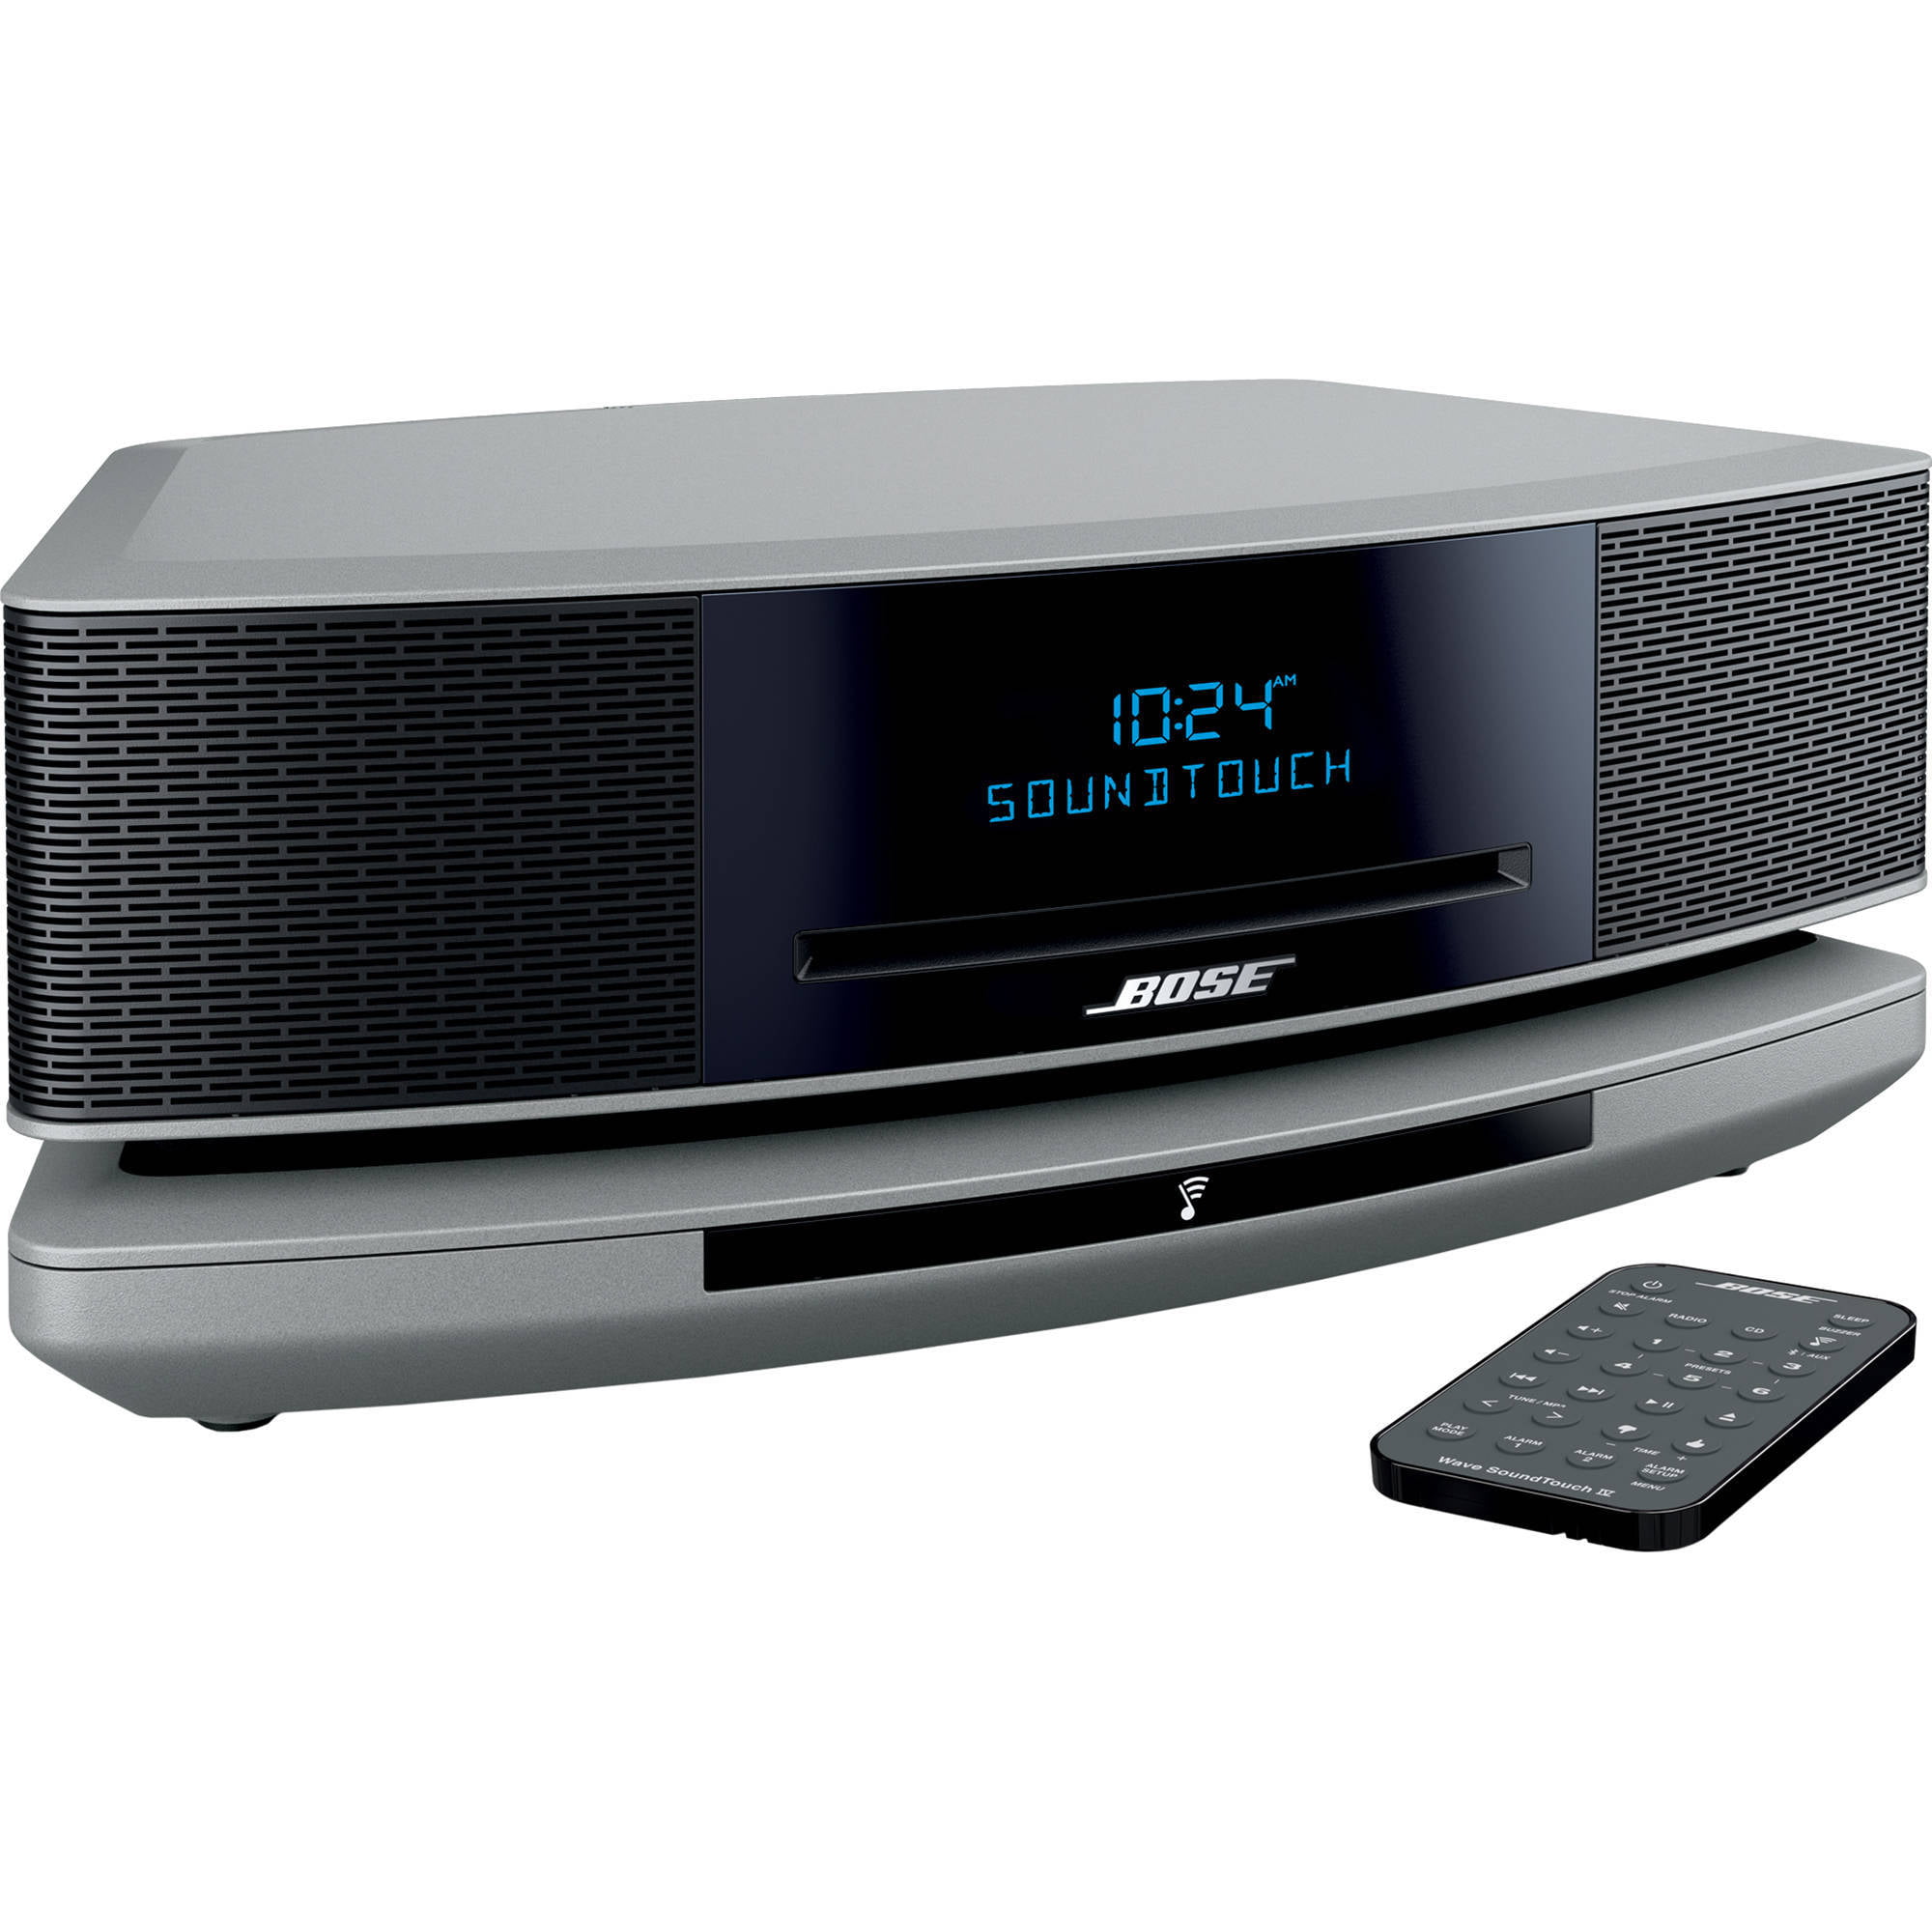 Bose Wave SoundTouch Home Audio System with Radio, CD, Bluetooth and WiFi